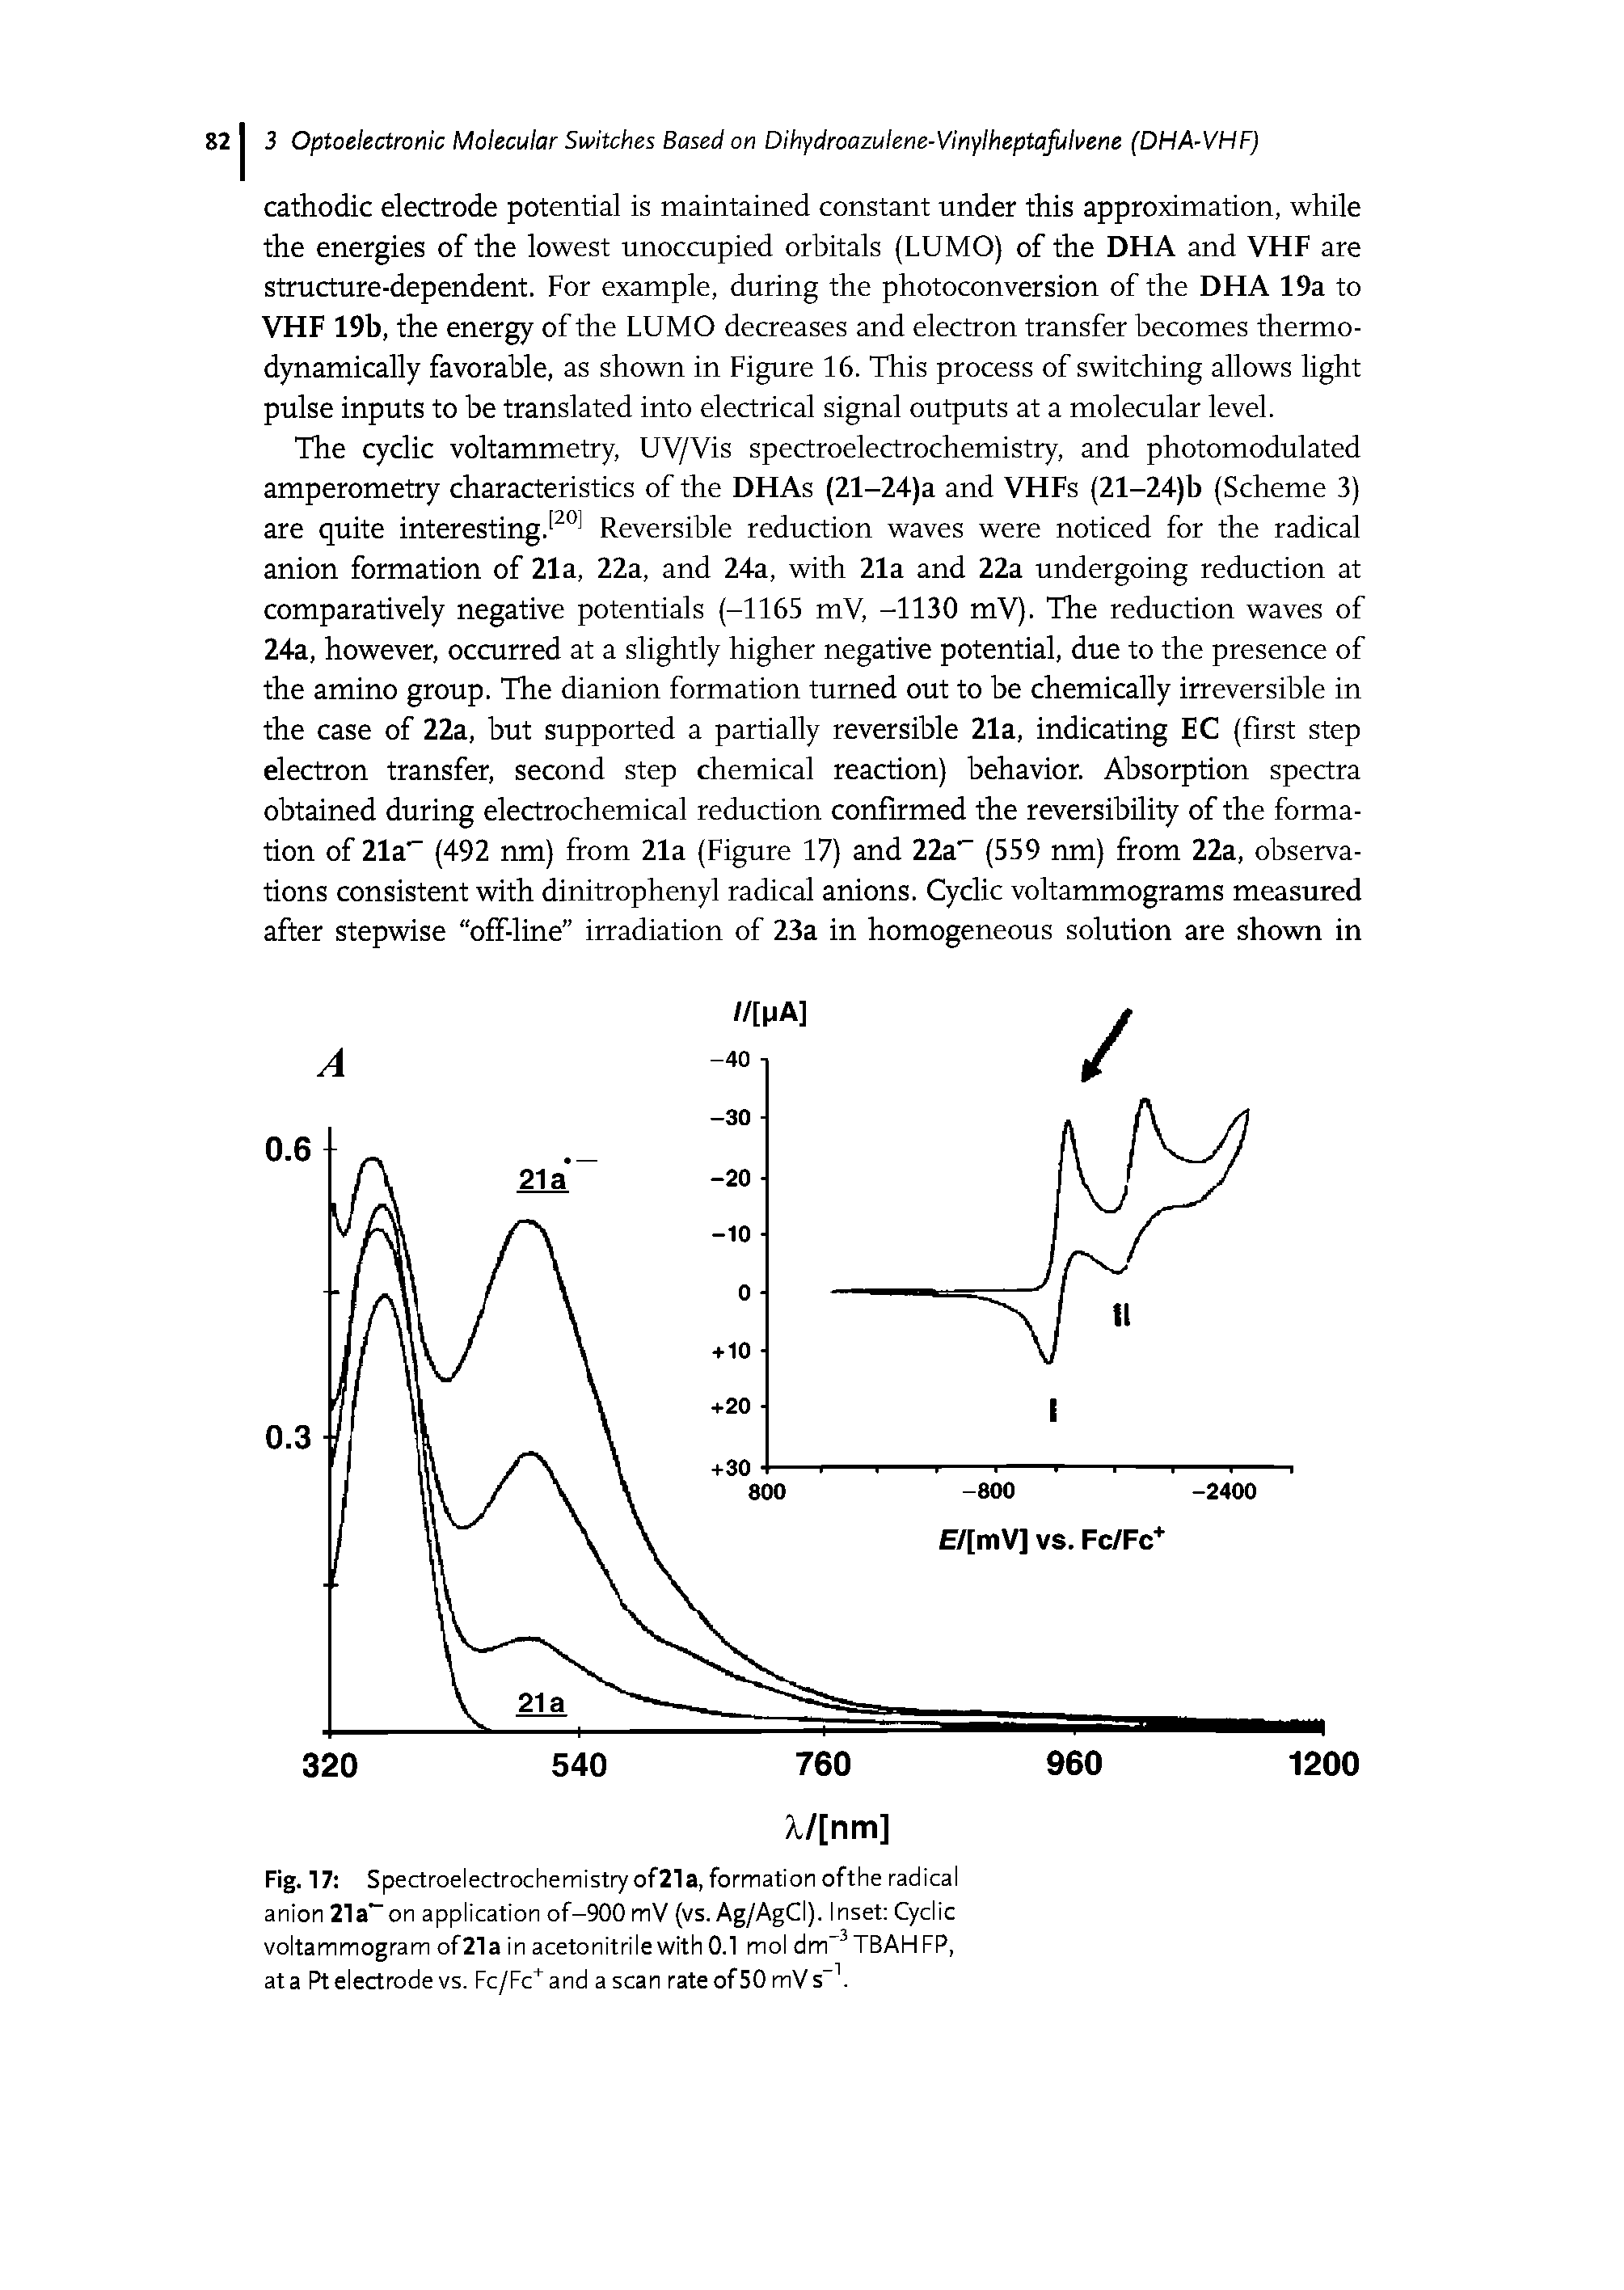 Fig. 17 Spectroelectrochemistry of21a, formation ofthe radical anion 21a on application of-900 mV (vs. Ag/AgCI). Inset Cyclic voltammogram of 21 a in acetonitrile with 0.1 mol dirT3TBAHFP, at a Pt electrode vs. Fc/Fc+and a scan rate of 50 mV s-1.